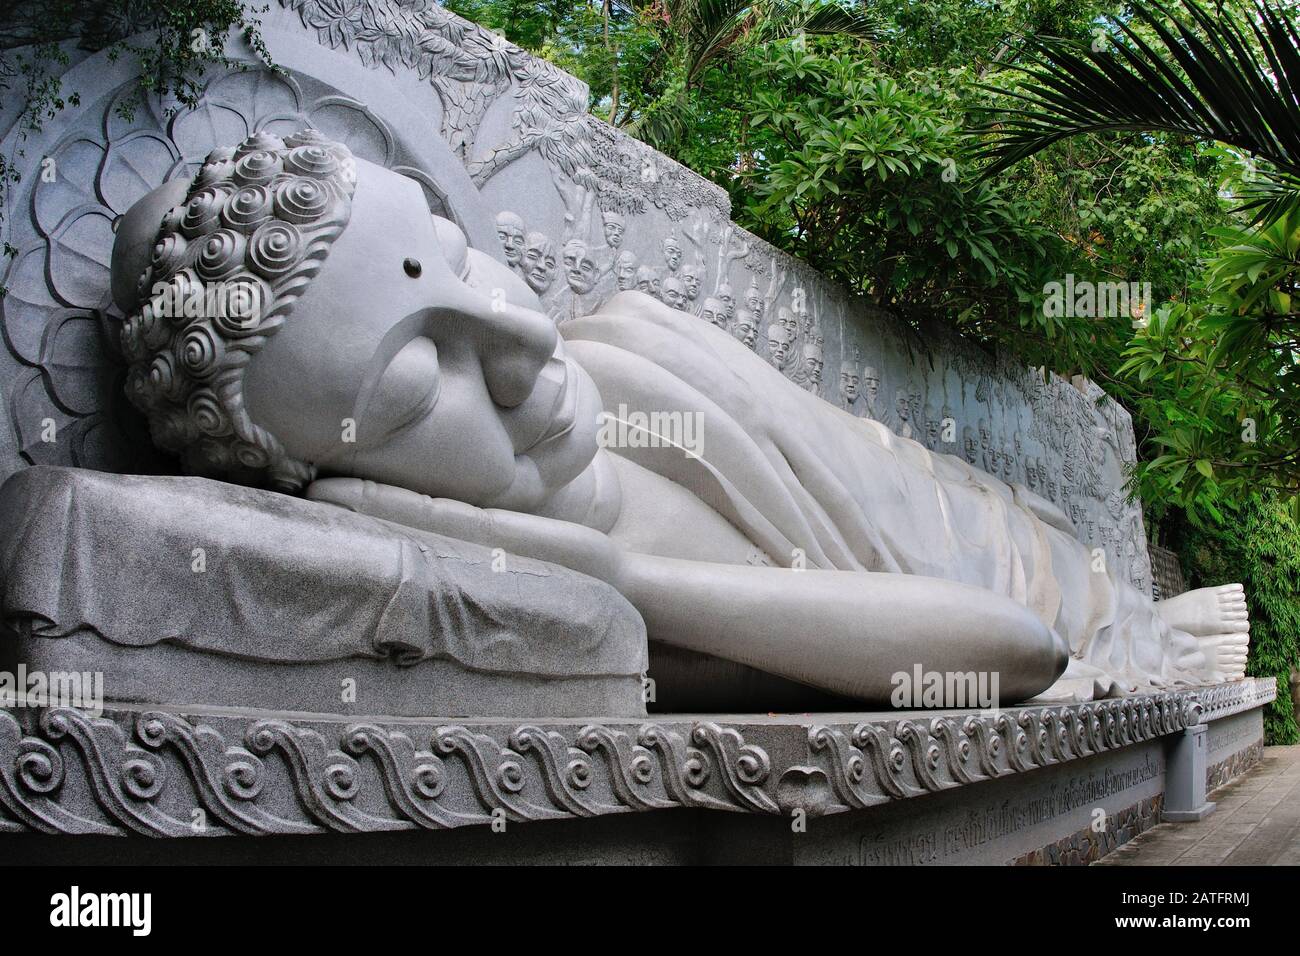 Statue of the lying Buddha at the Long Son complex, Nha Trang, Vietnam Stock Photo